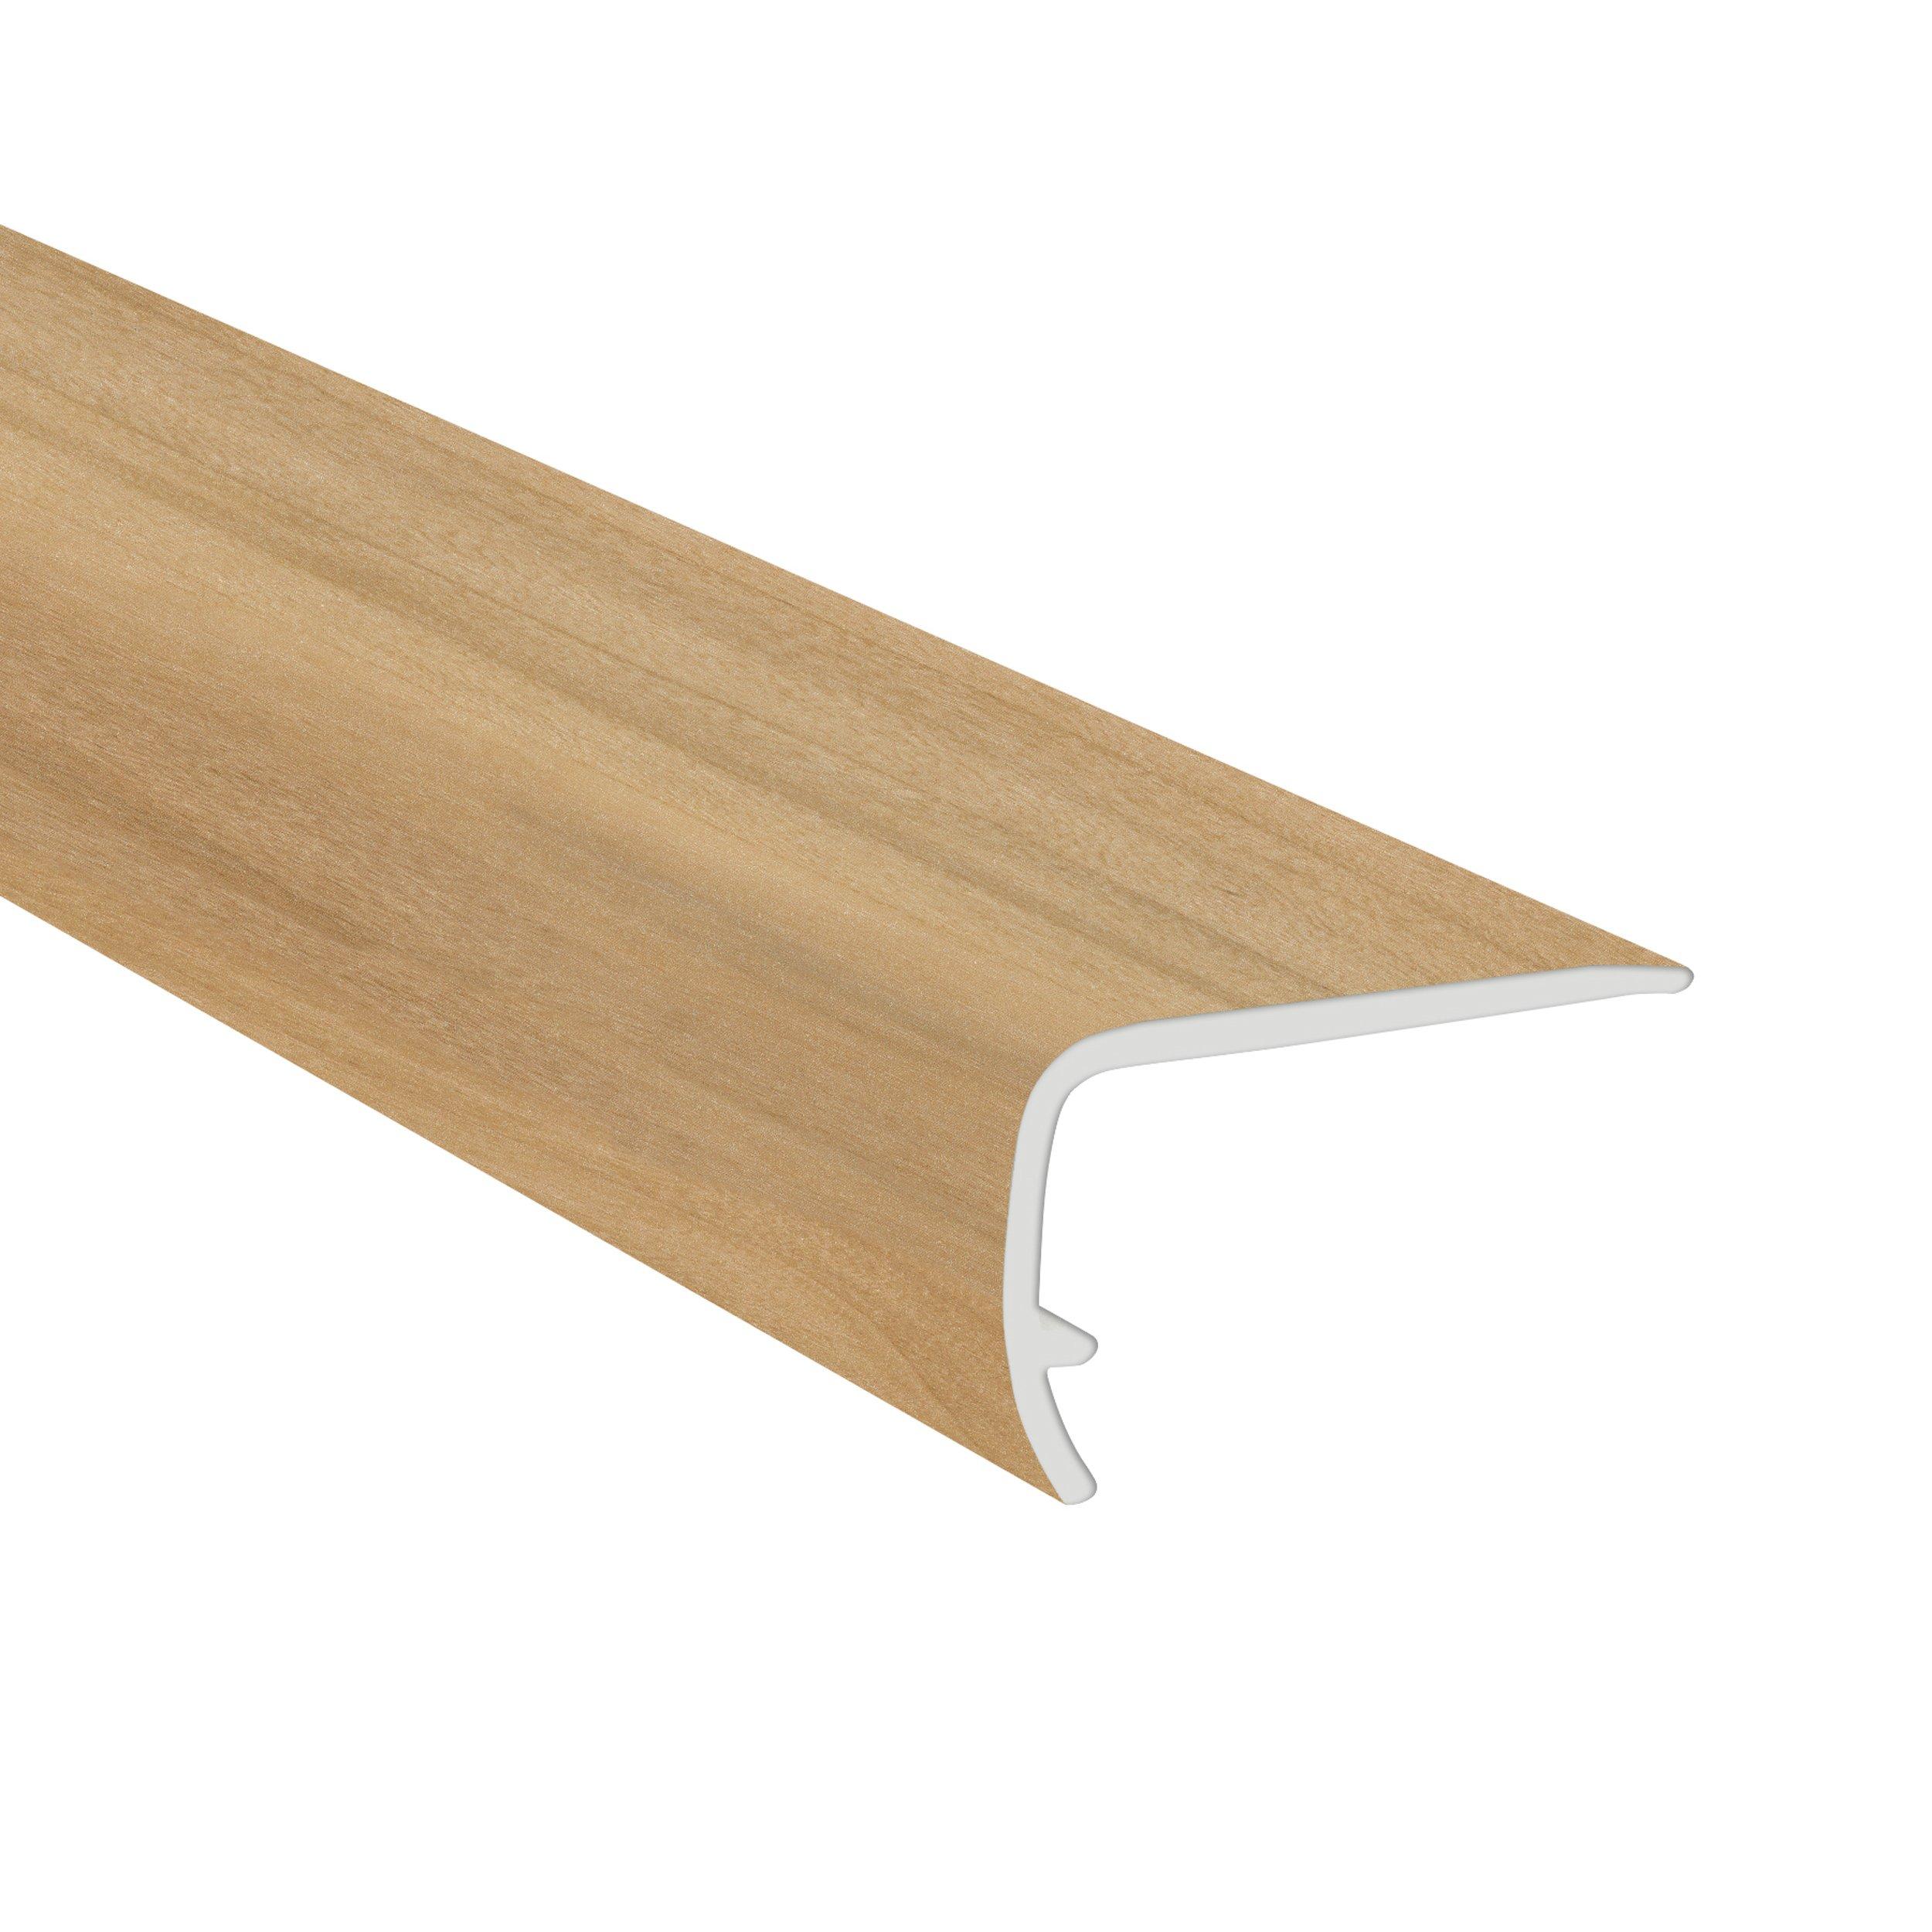 Antioch Acacia 94in. Laminate Overlapping Stair Nose